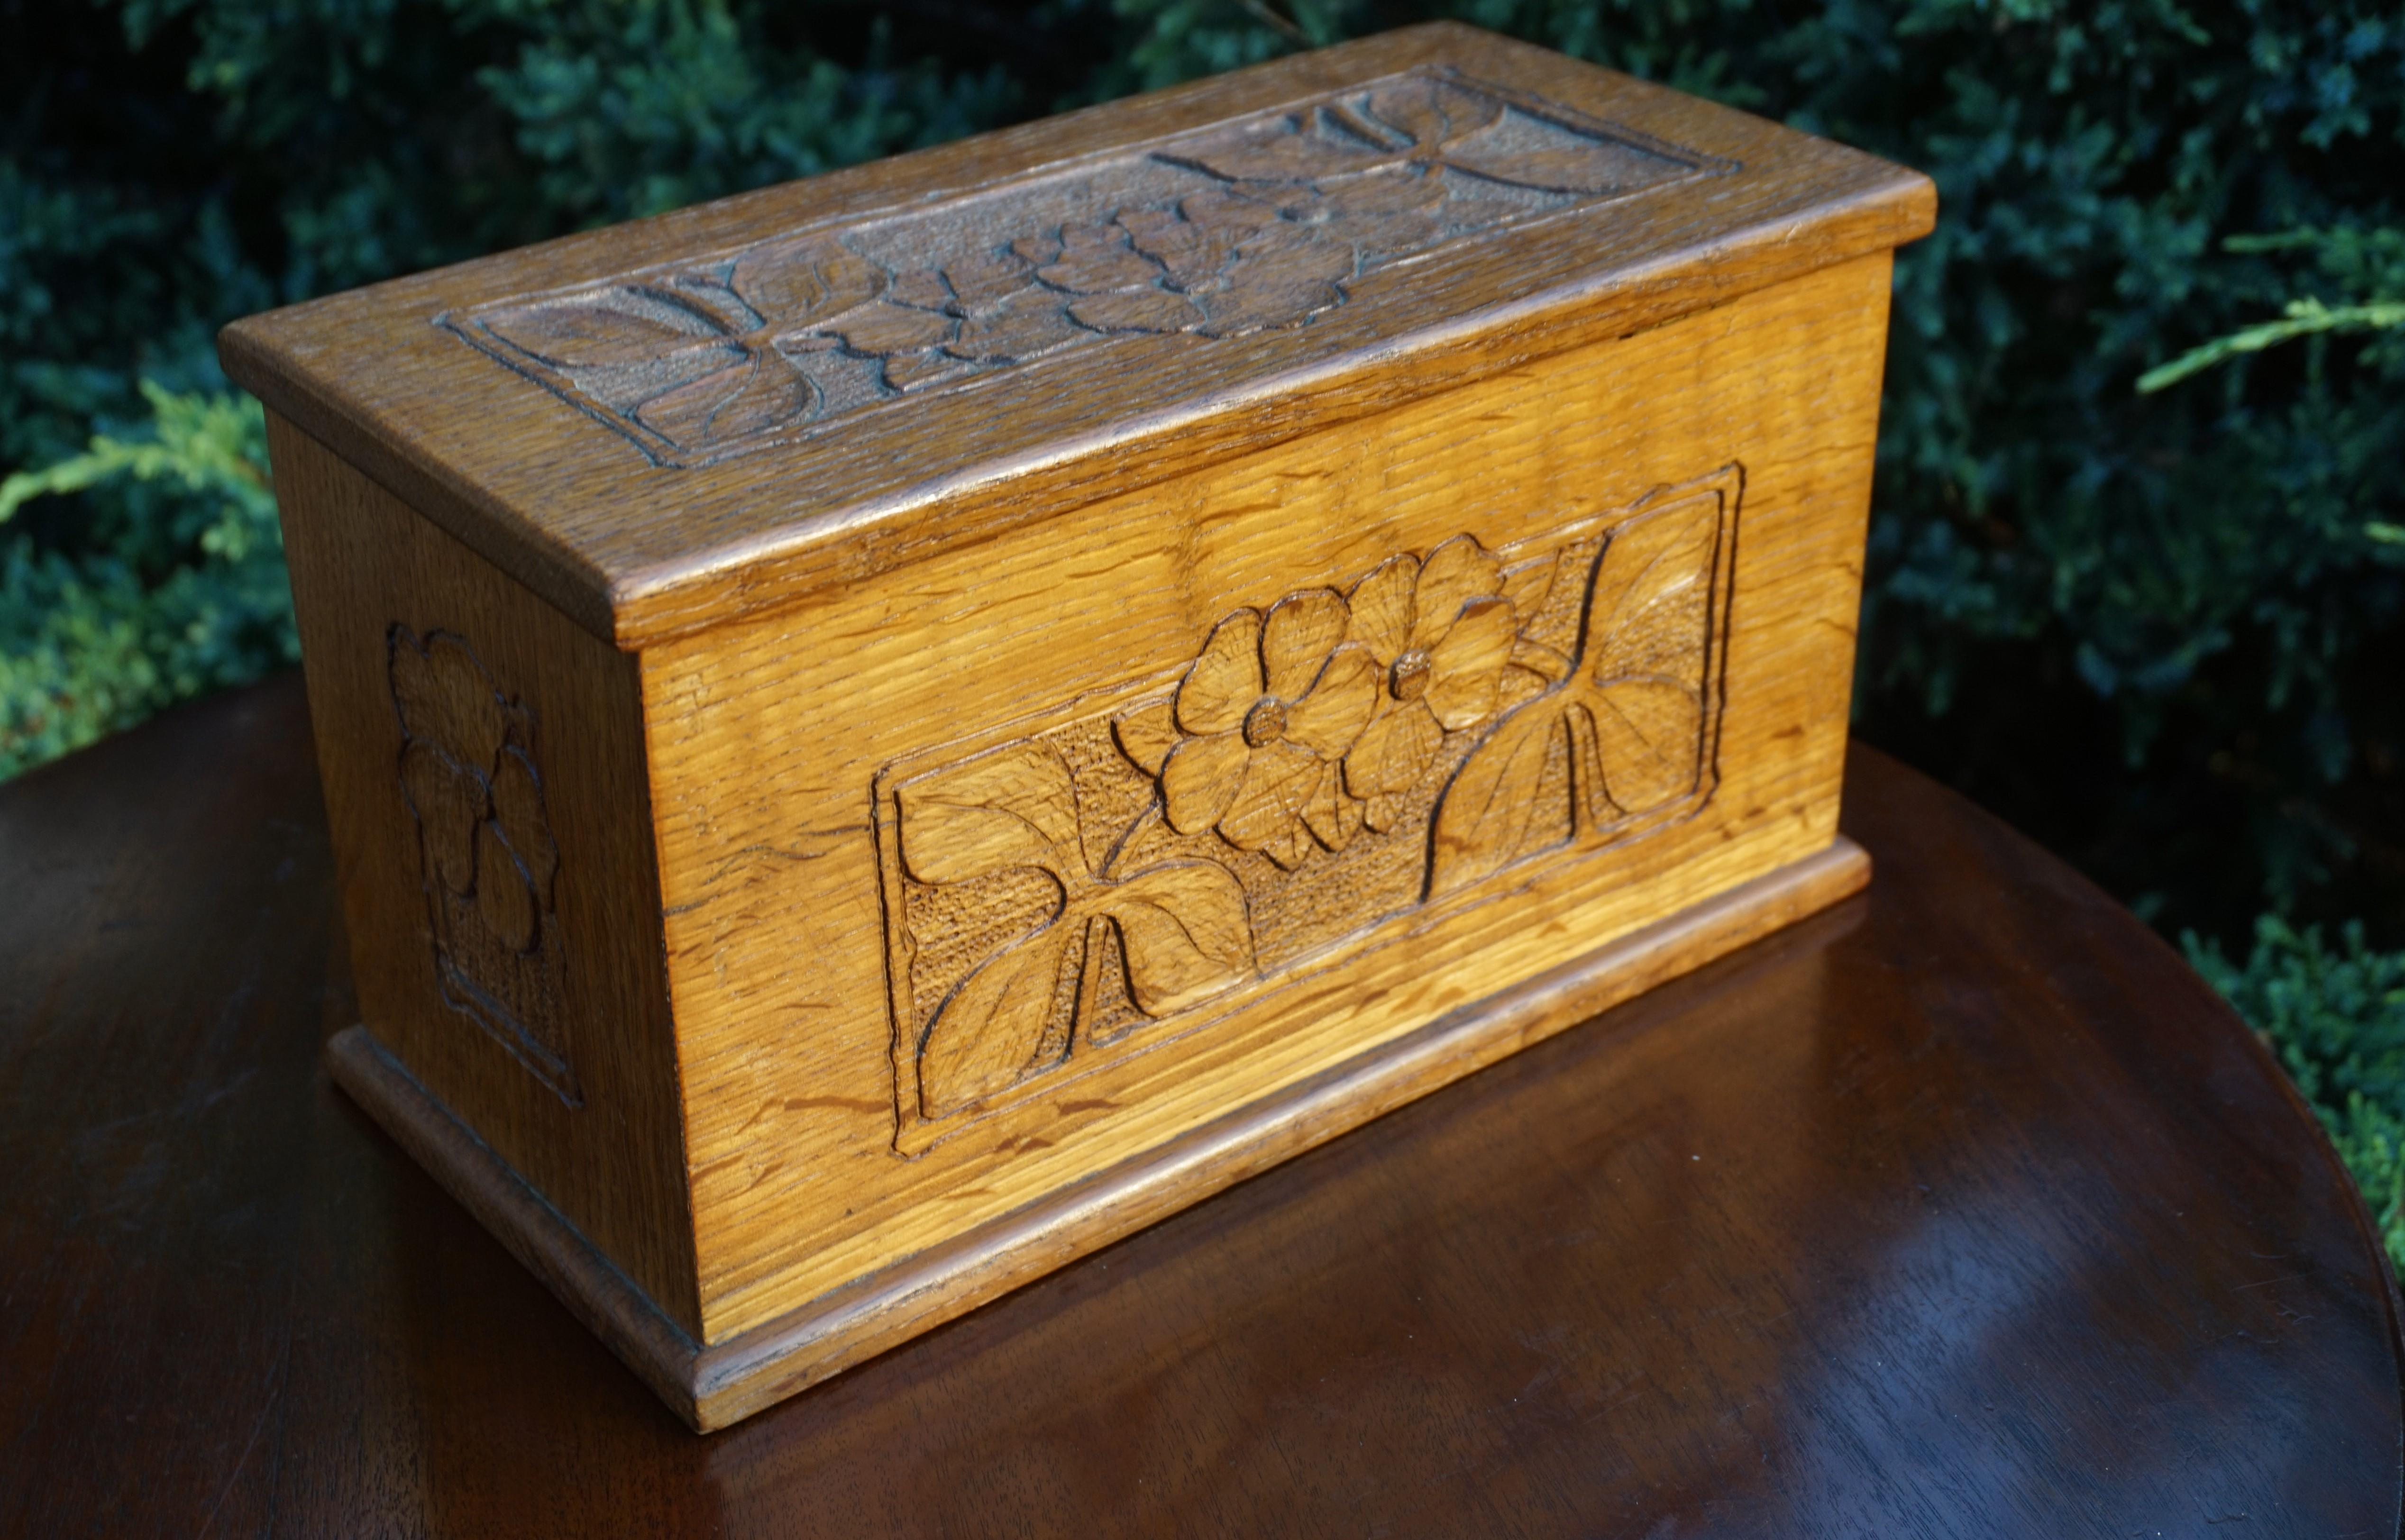 Antique and Unique Arts & Crafts Oak Jewelry Box with Hand Carved Flower Decor For Sale 2